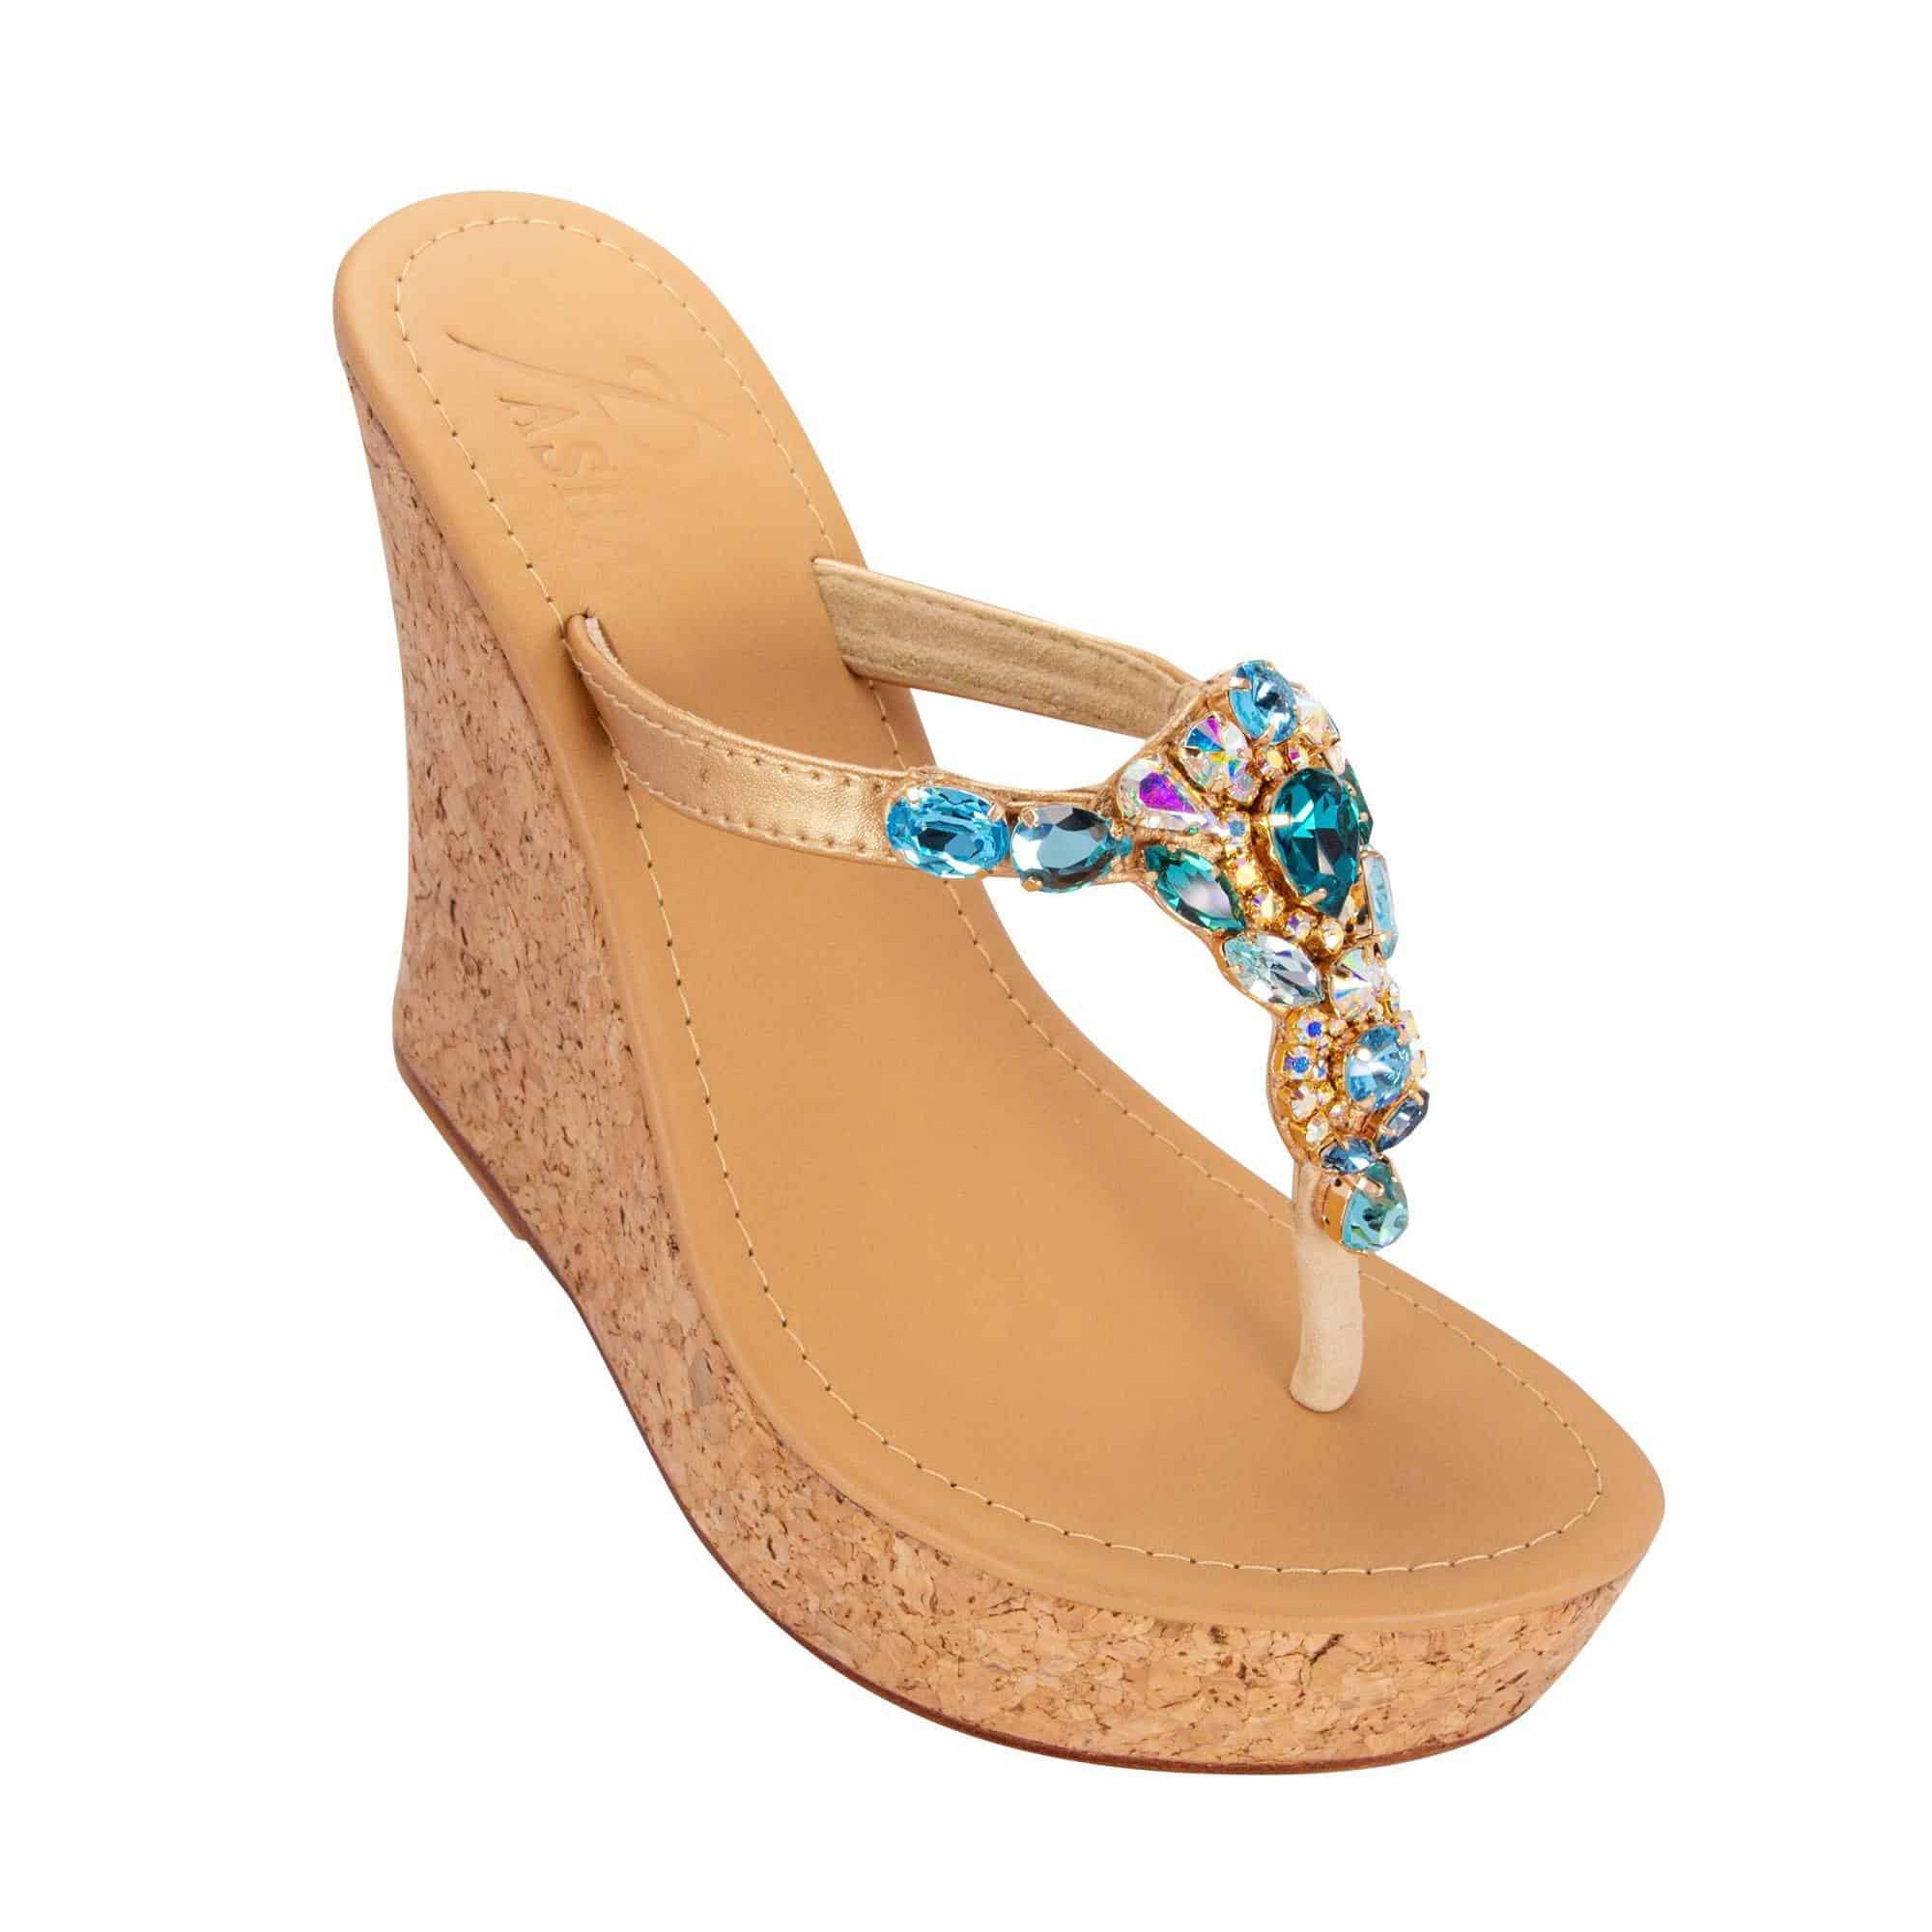 JEKYLL - Pasha Sandals - Jewelry for your feet - 